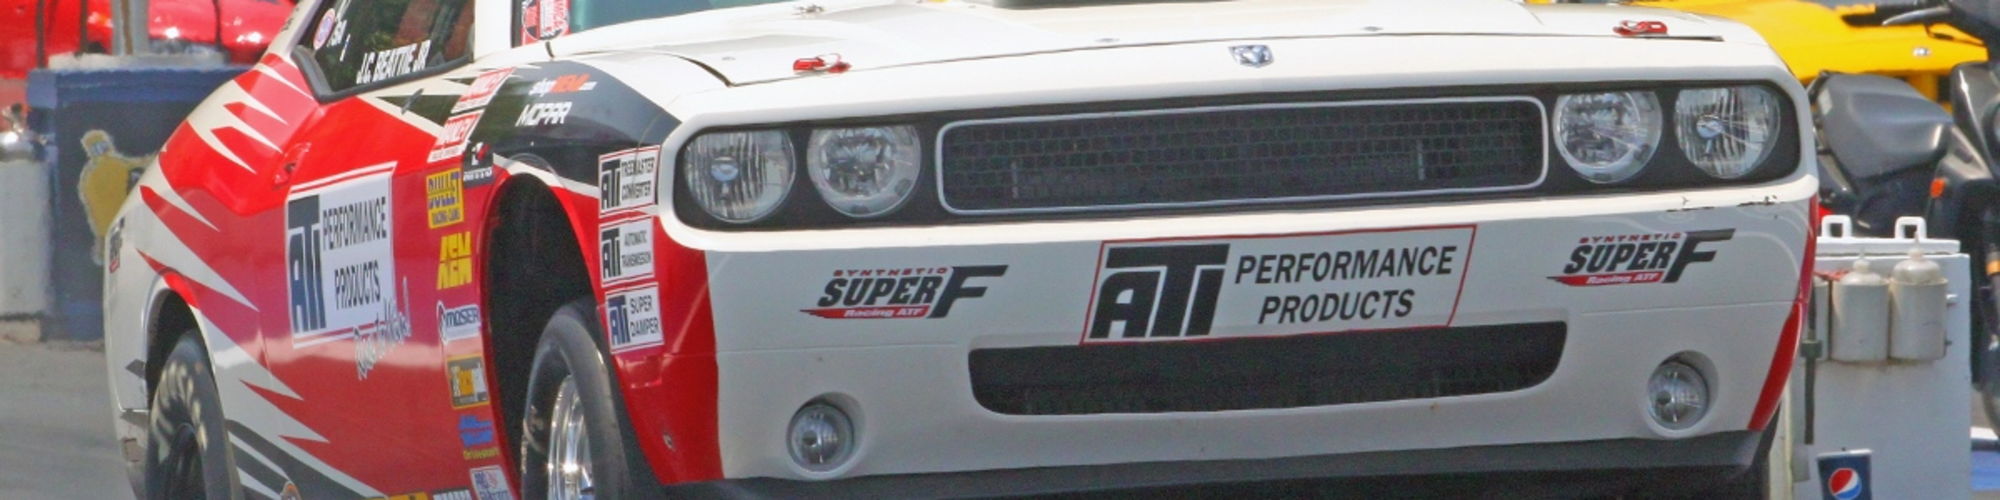 ATI Performance Products cover image